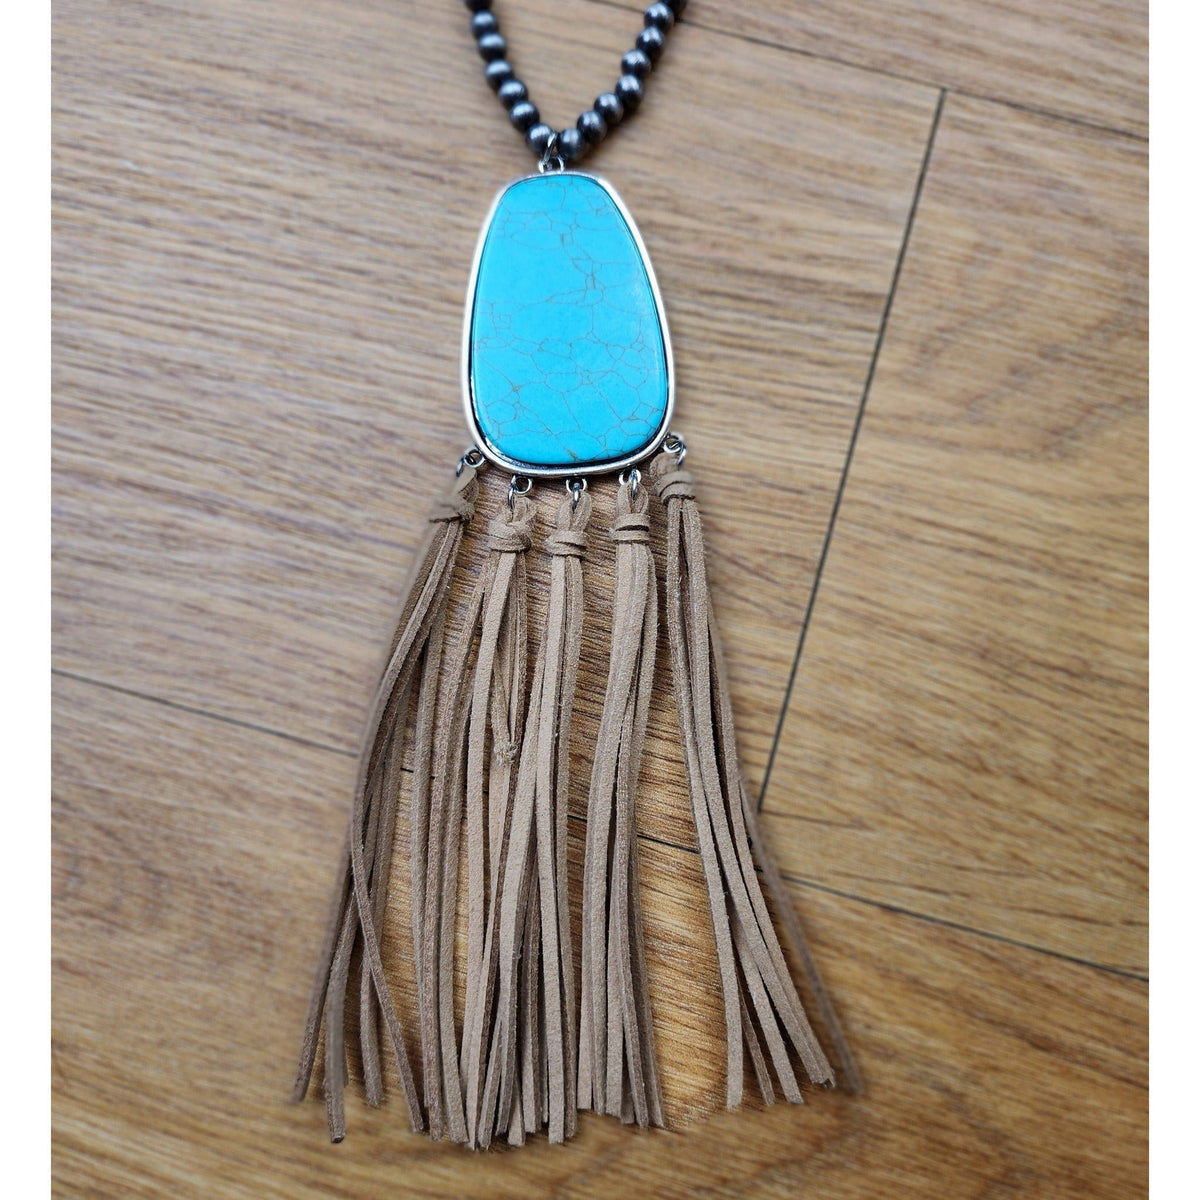 On the Fringe Turquoise and Leather Beaded Necklace with Earrings Western Necklace TheFringeCultureCollective